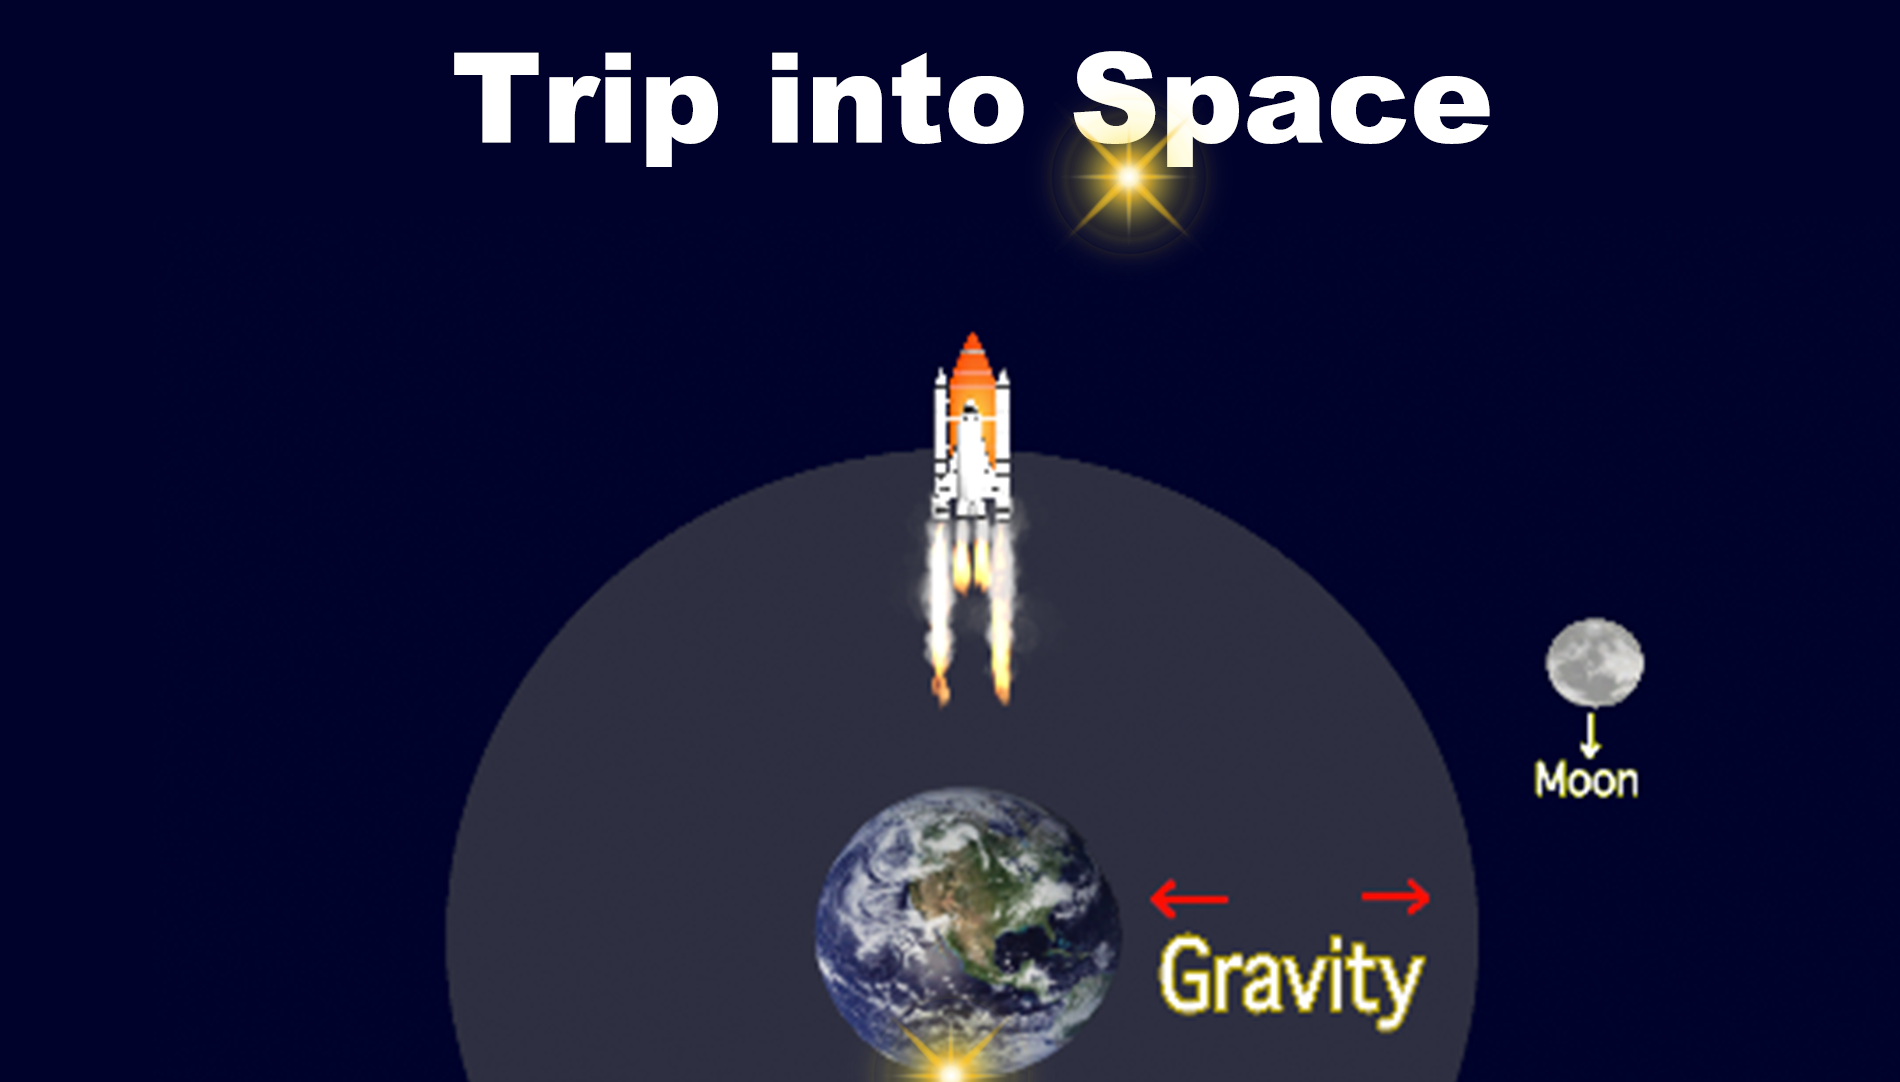 TRIP INTO SPACE